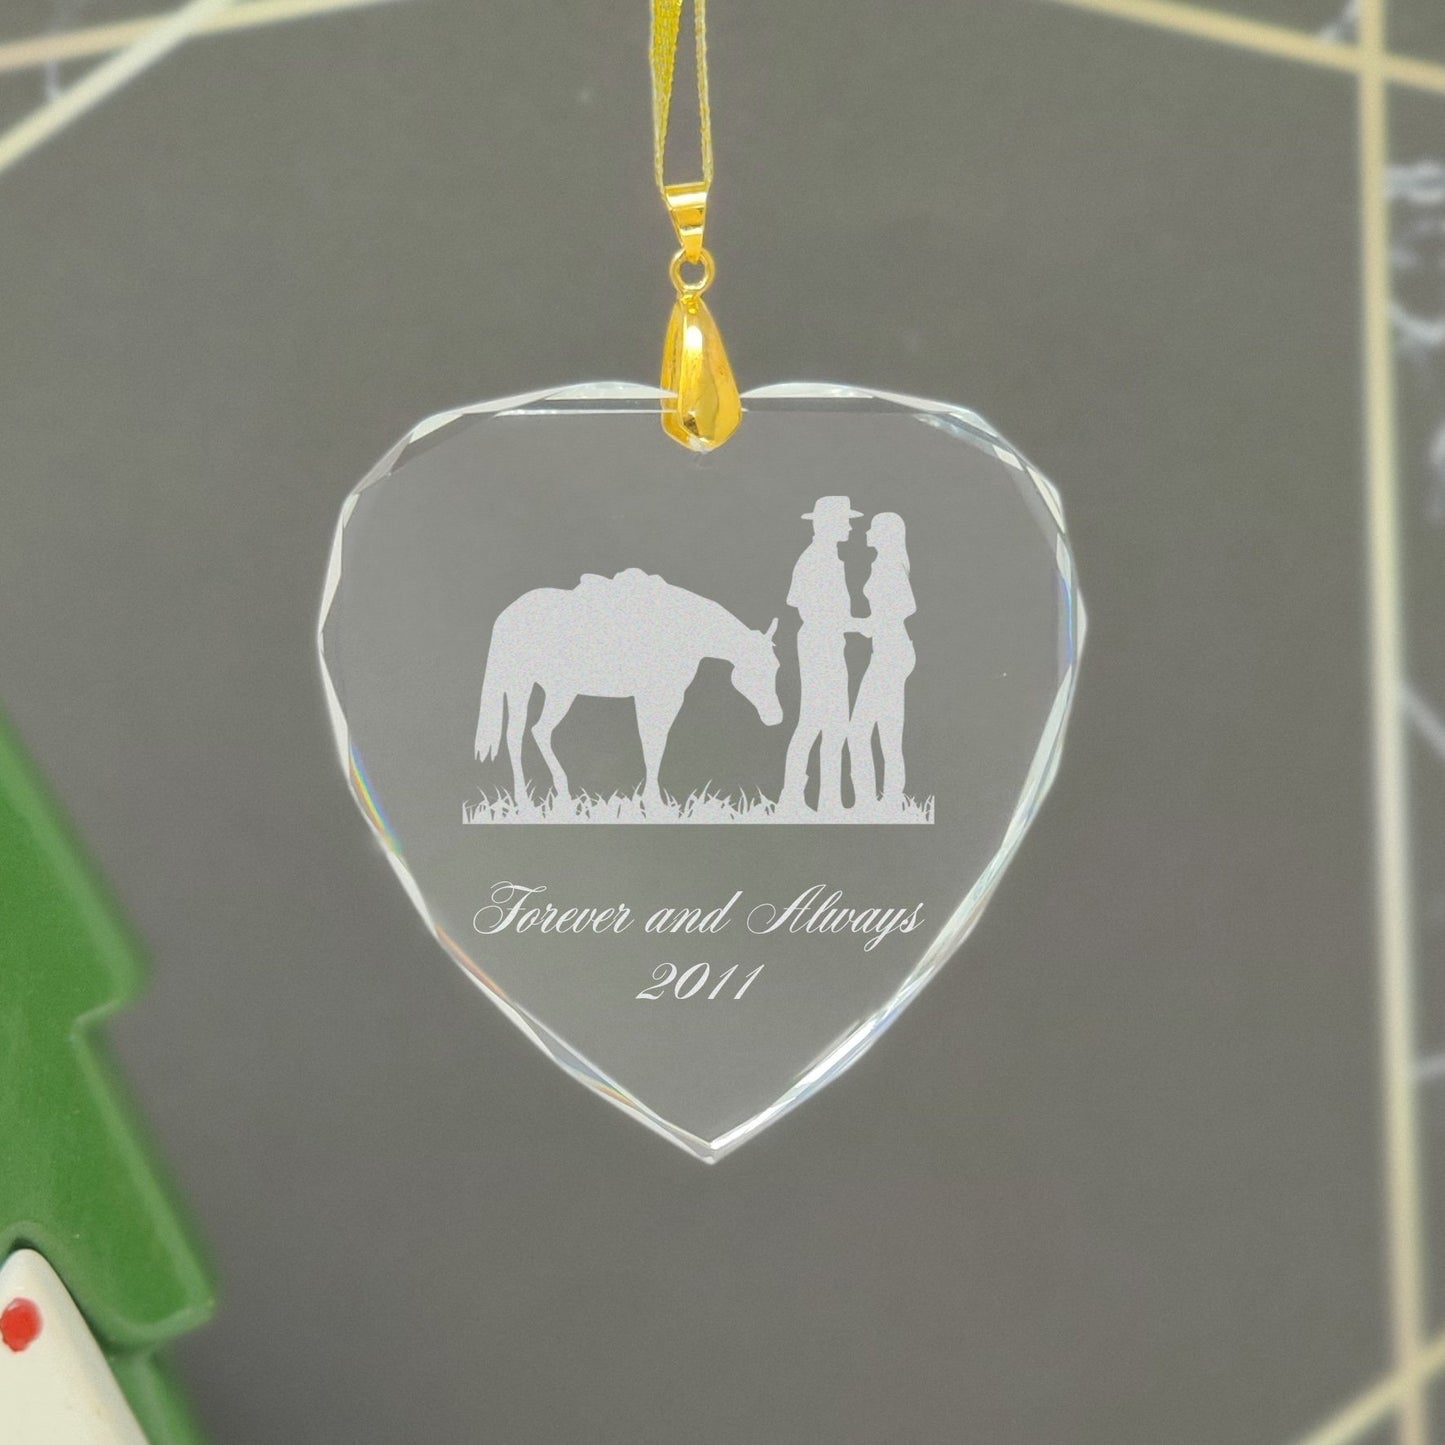 LaserGram Christmas Ornament, Military Helicopter 1, Personalized Engraving Included (Heart Shape)